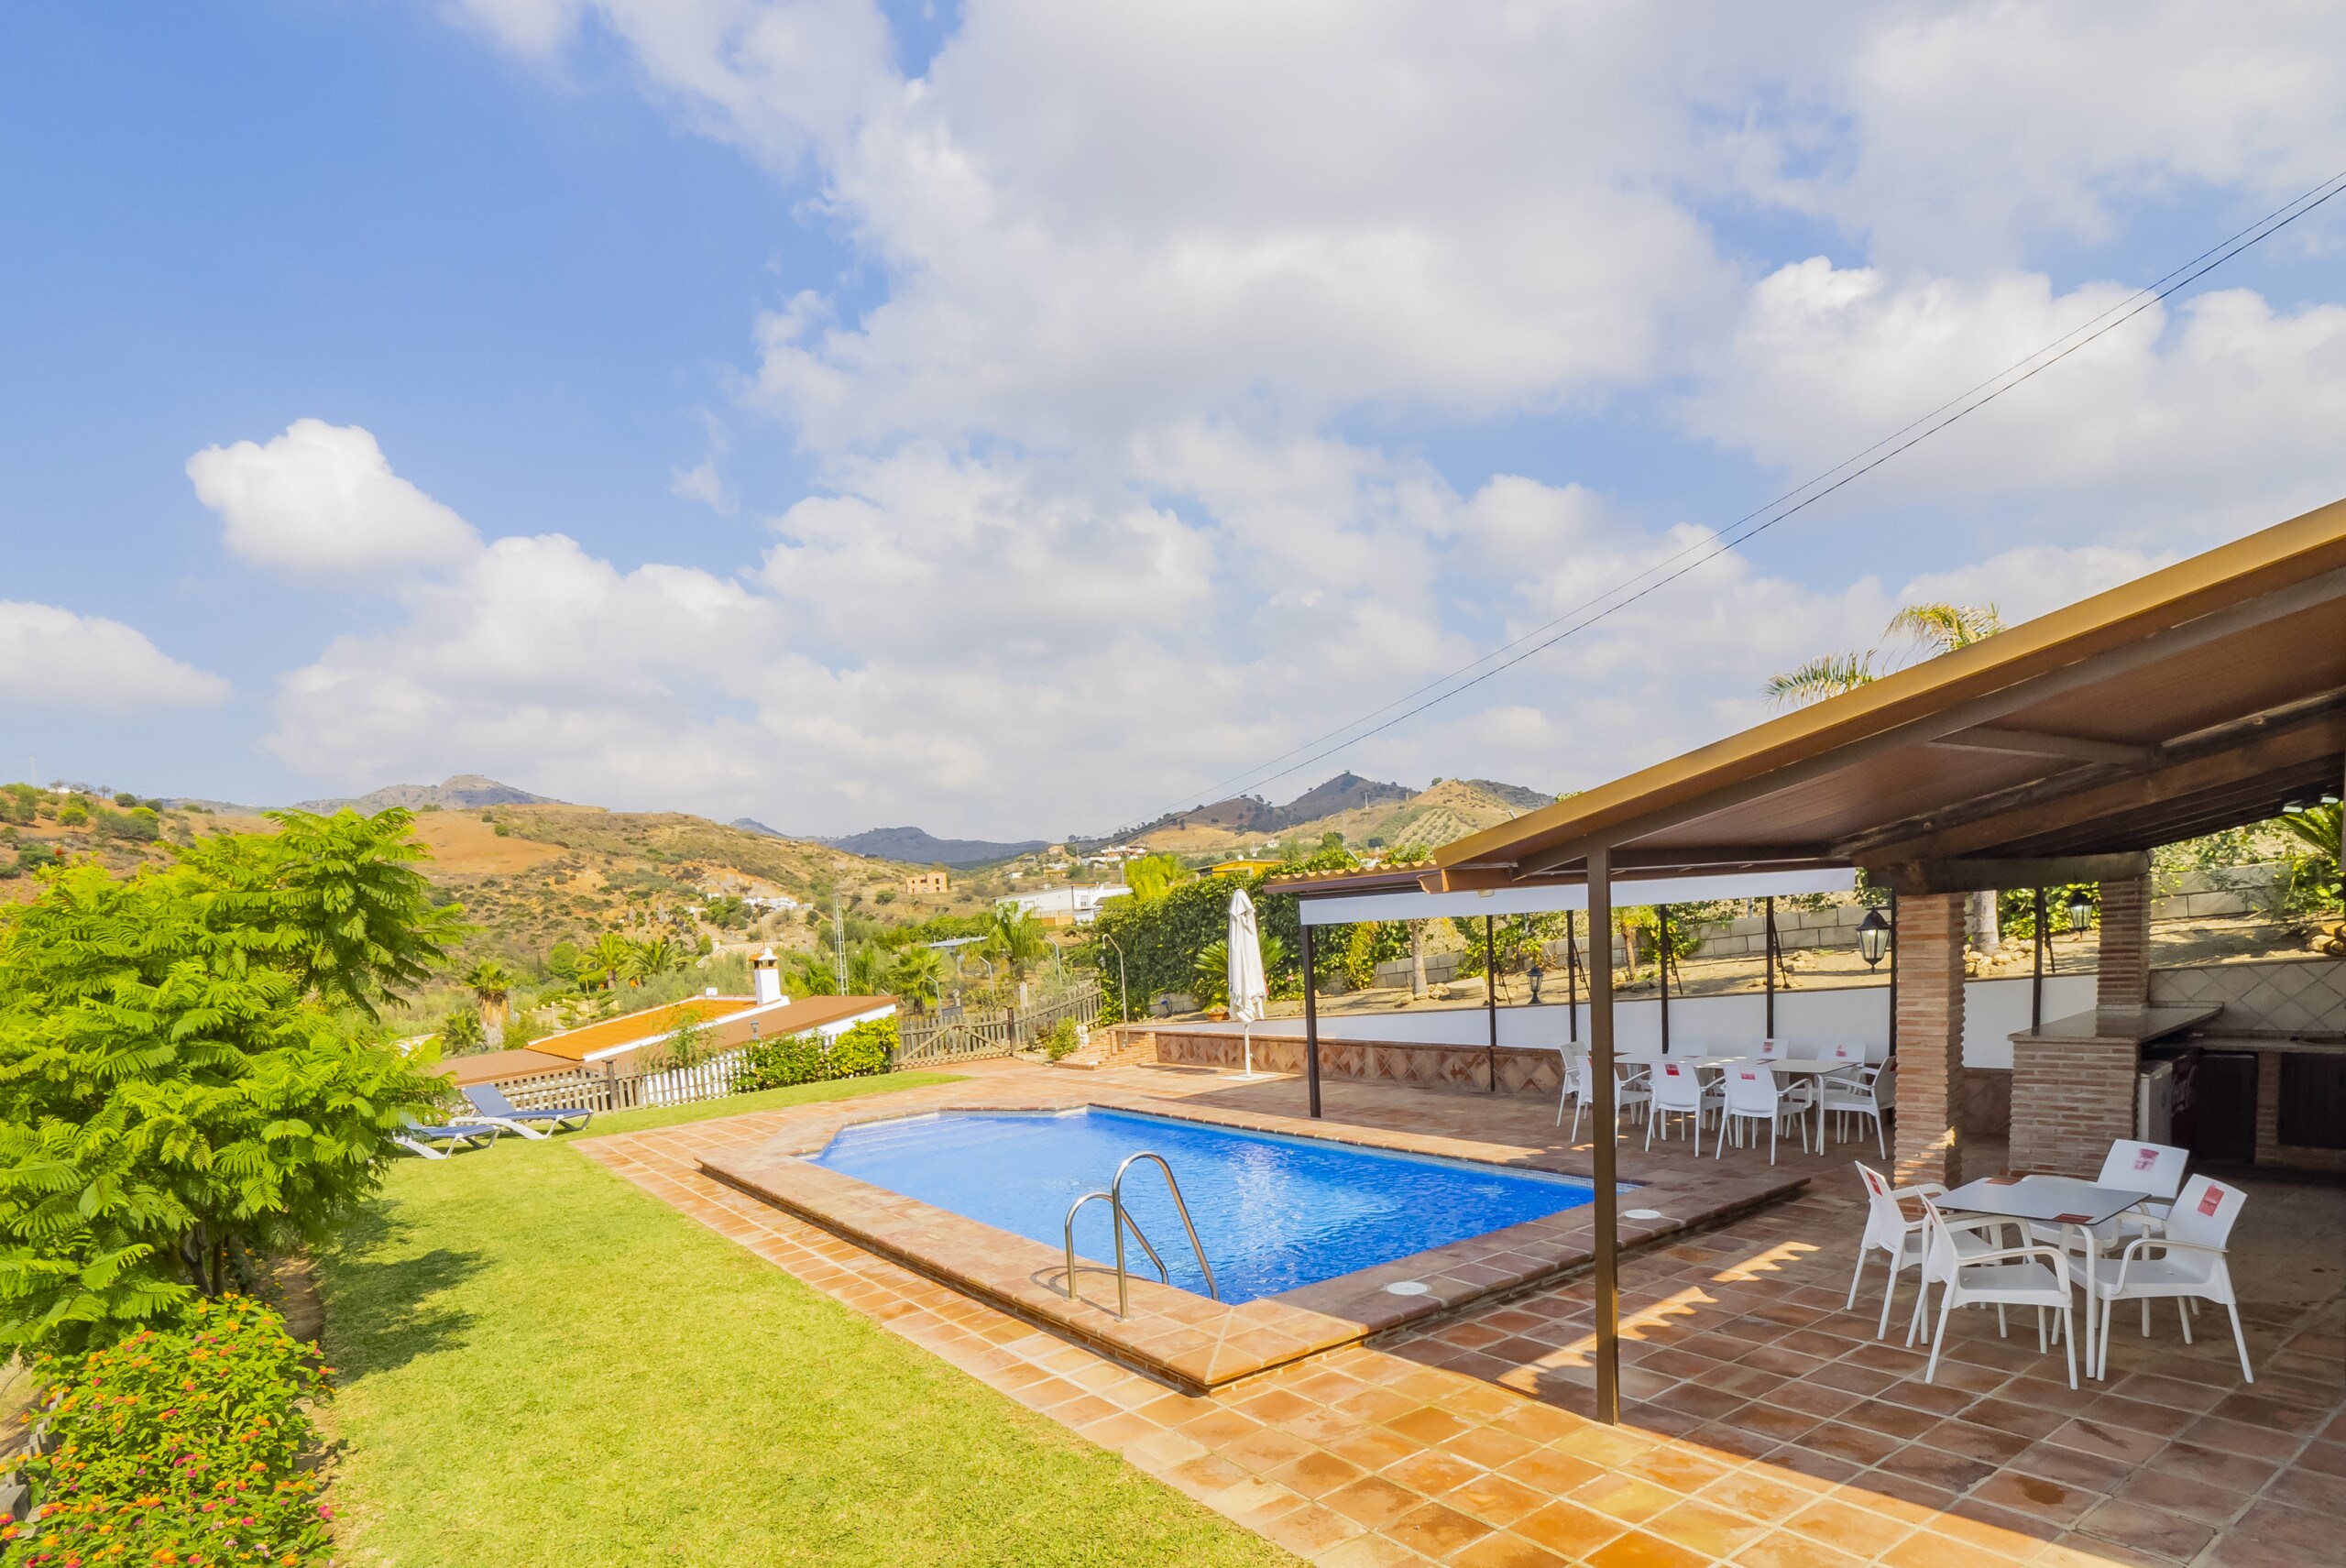 Enjoy the pool of this rural house in Pizarra